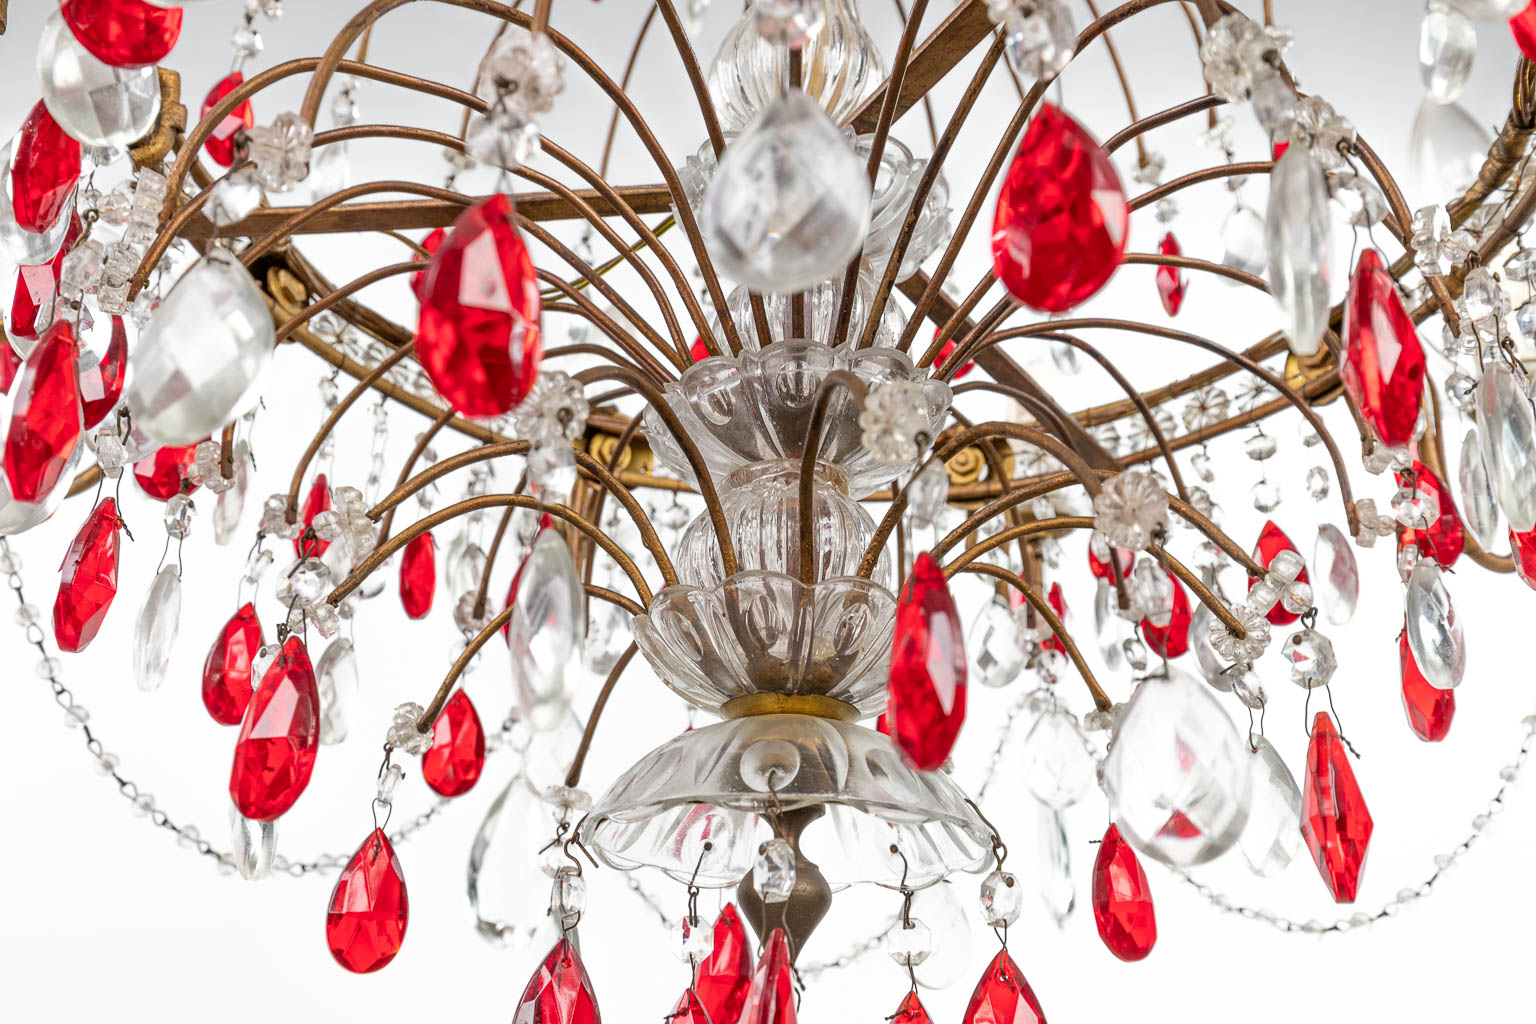 A decorative chandelier made of brass and decorated with white and red glass. (H:95cm)